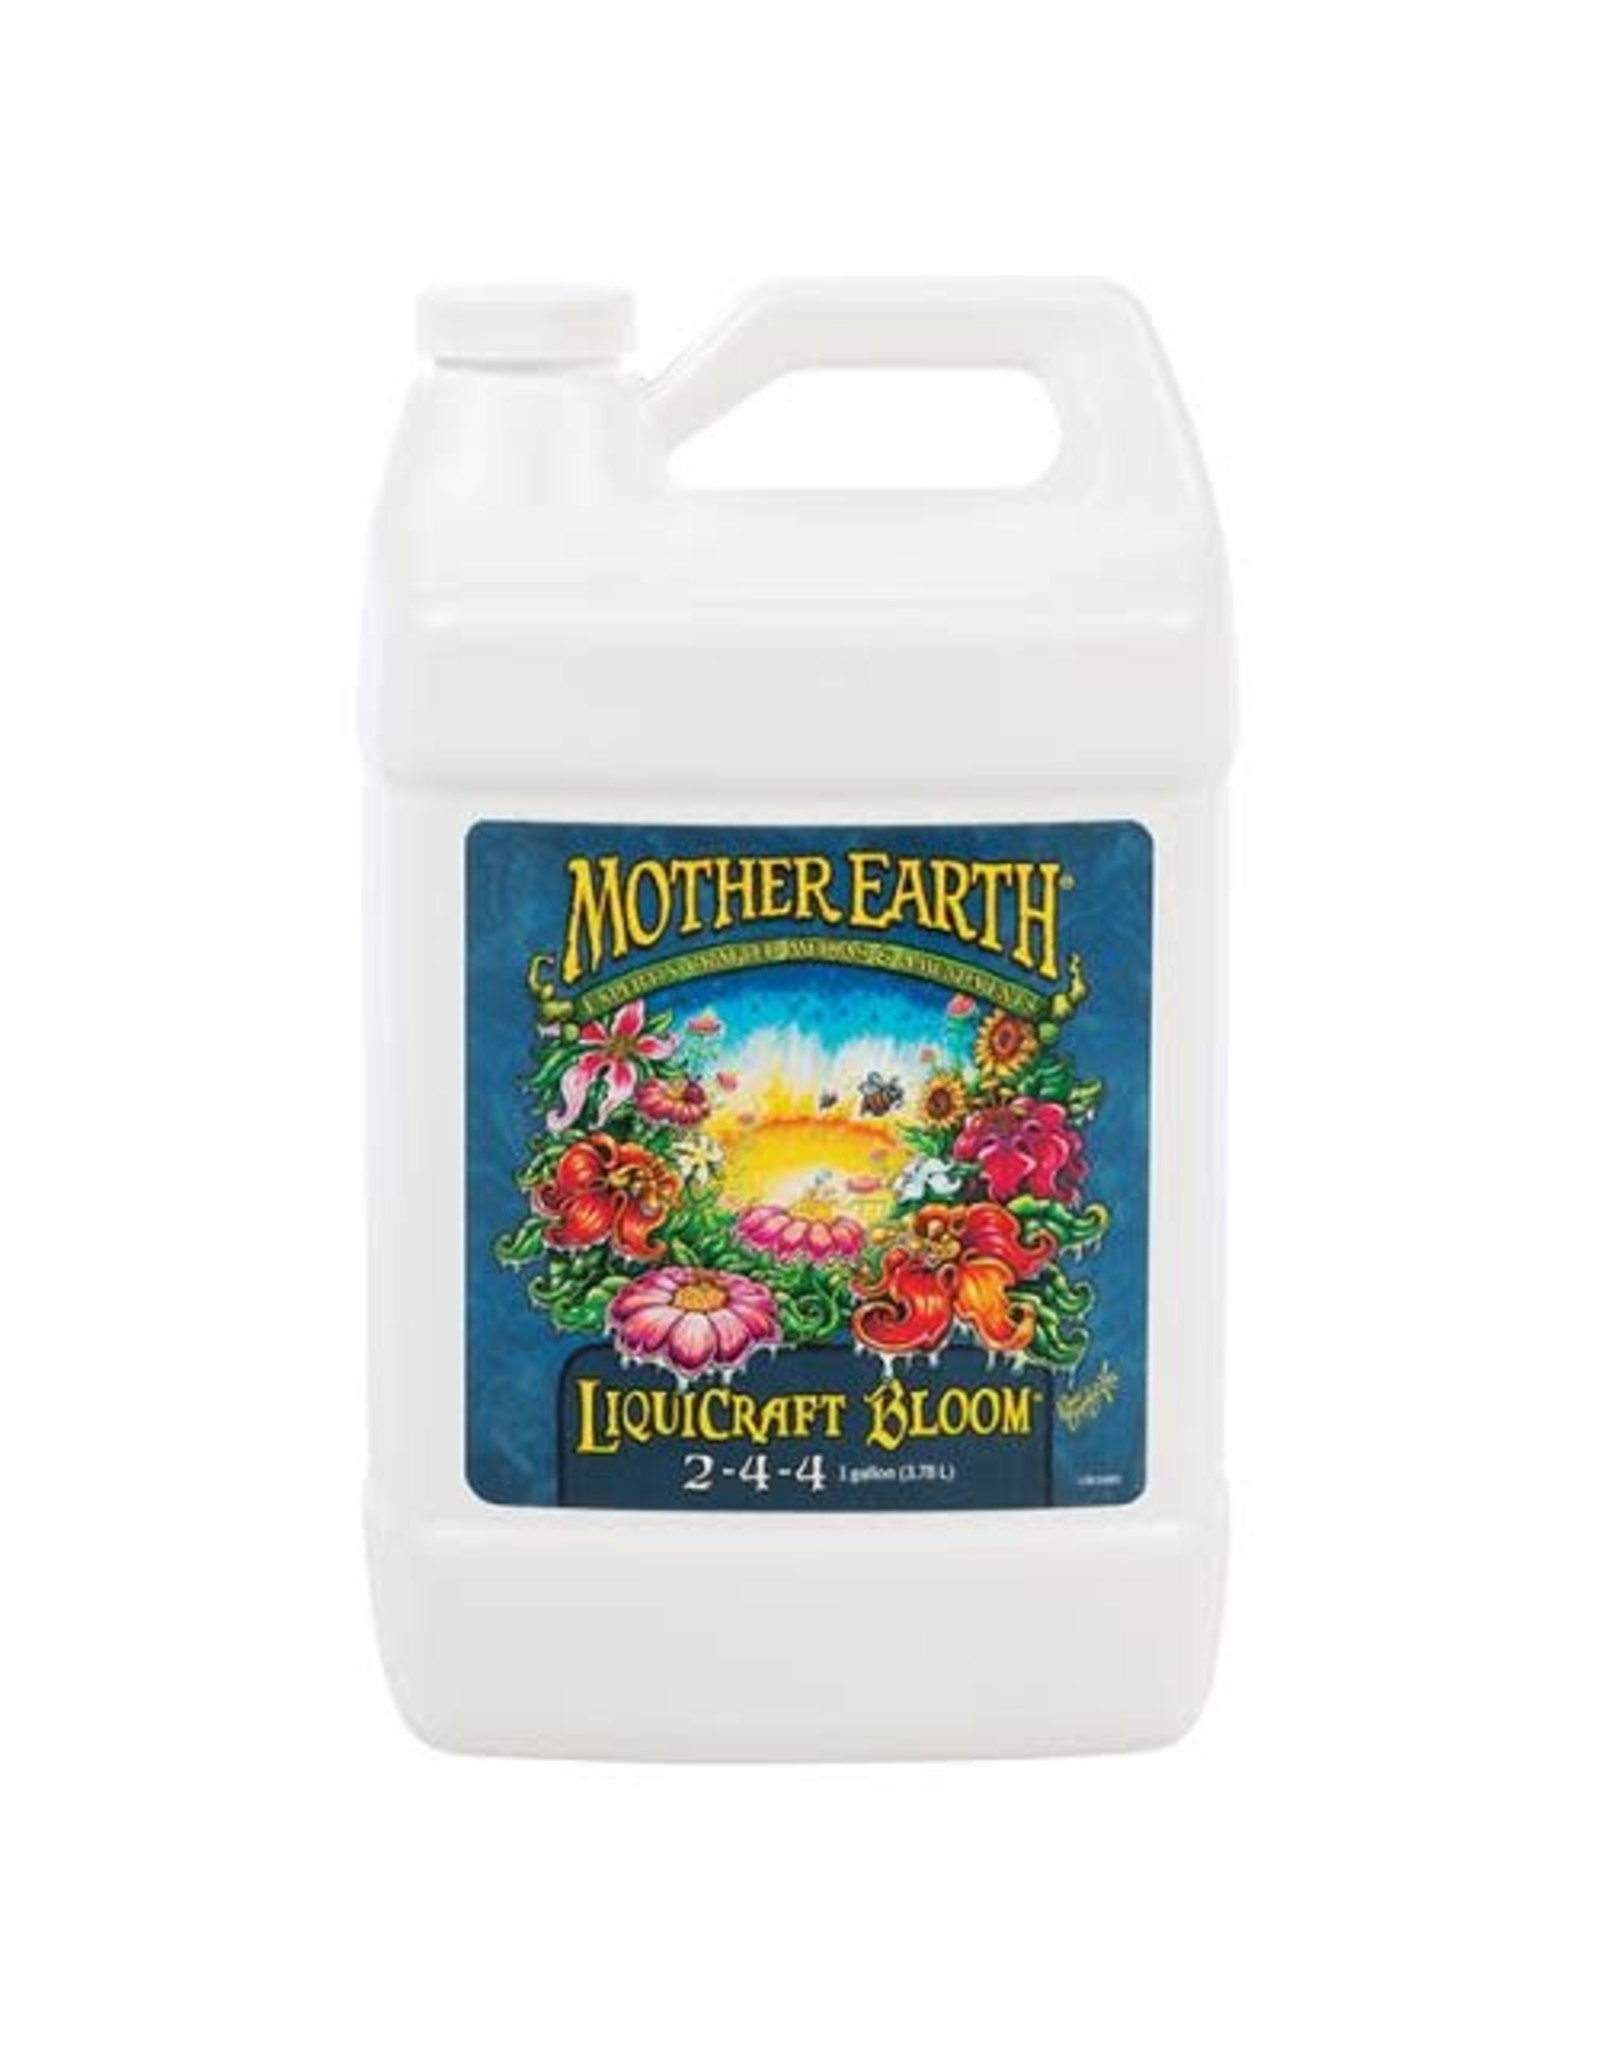 Mother Earth Mother Earth Liquicraft Bloom Gallon